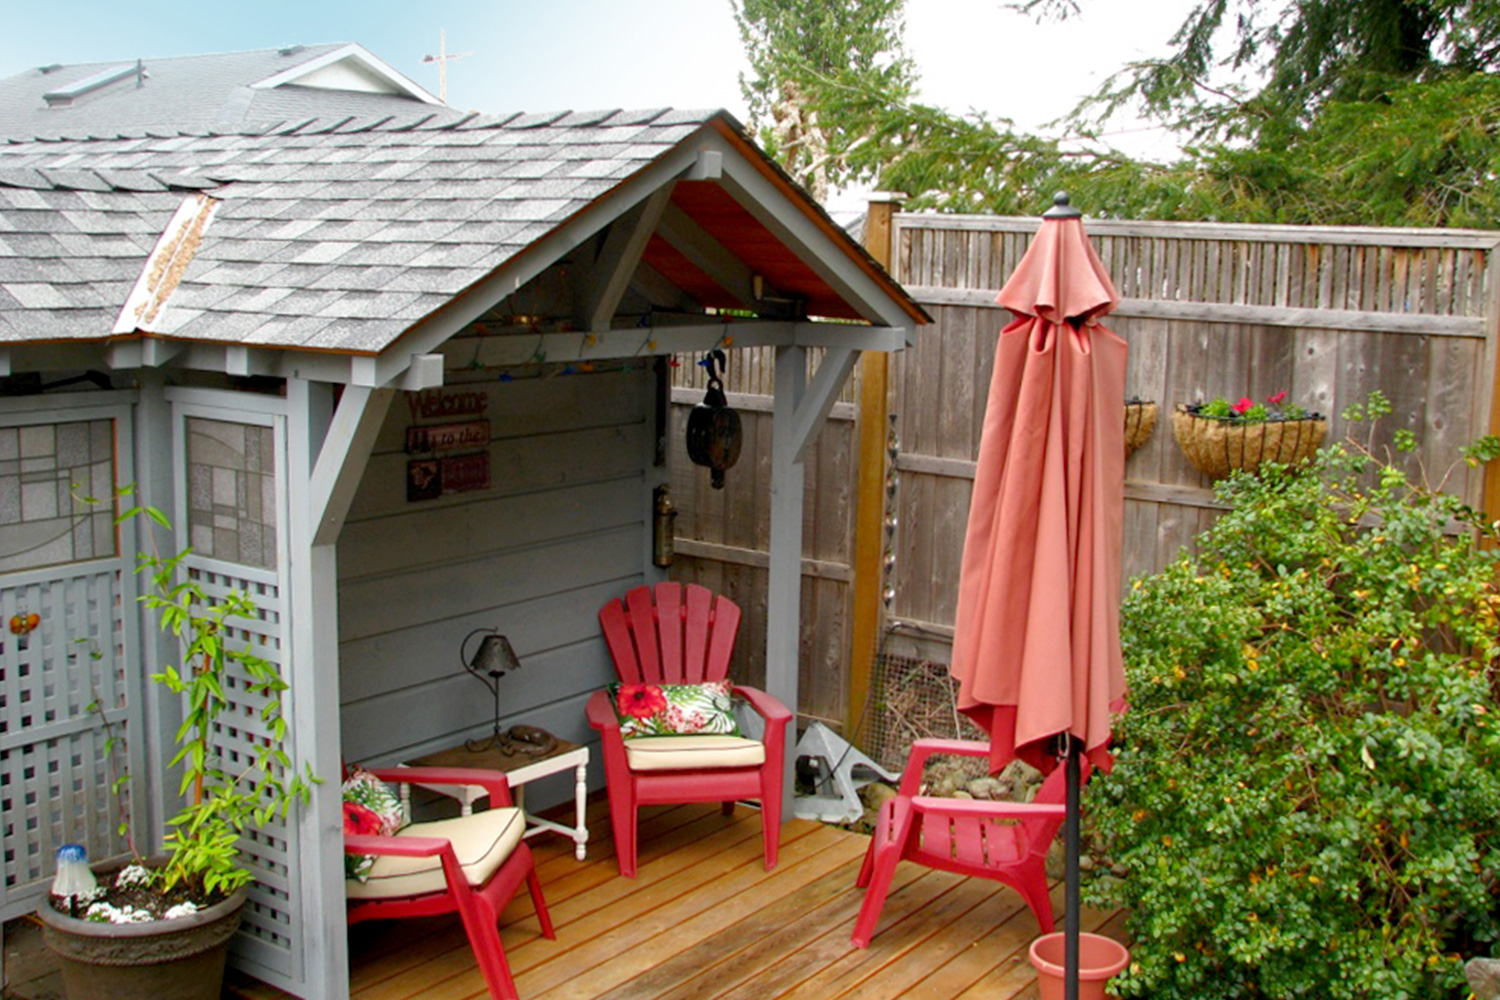 With an overhanging roof for seating and barbecuing, a simple shed was transformed into a comfortable back yard retreat. Donna Balzer / For CREB®Now